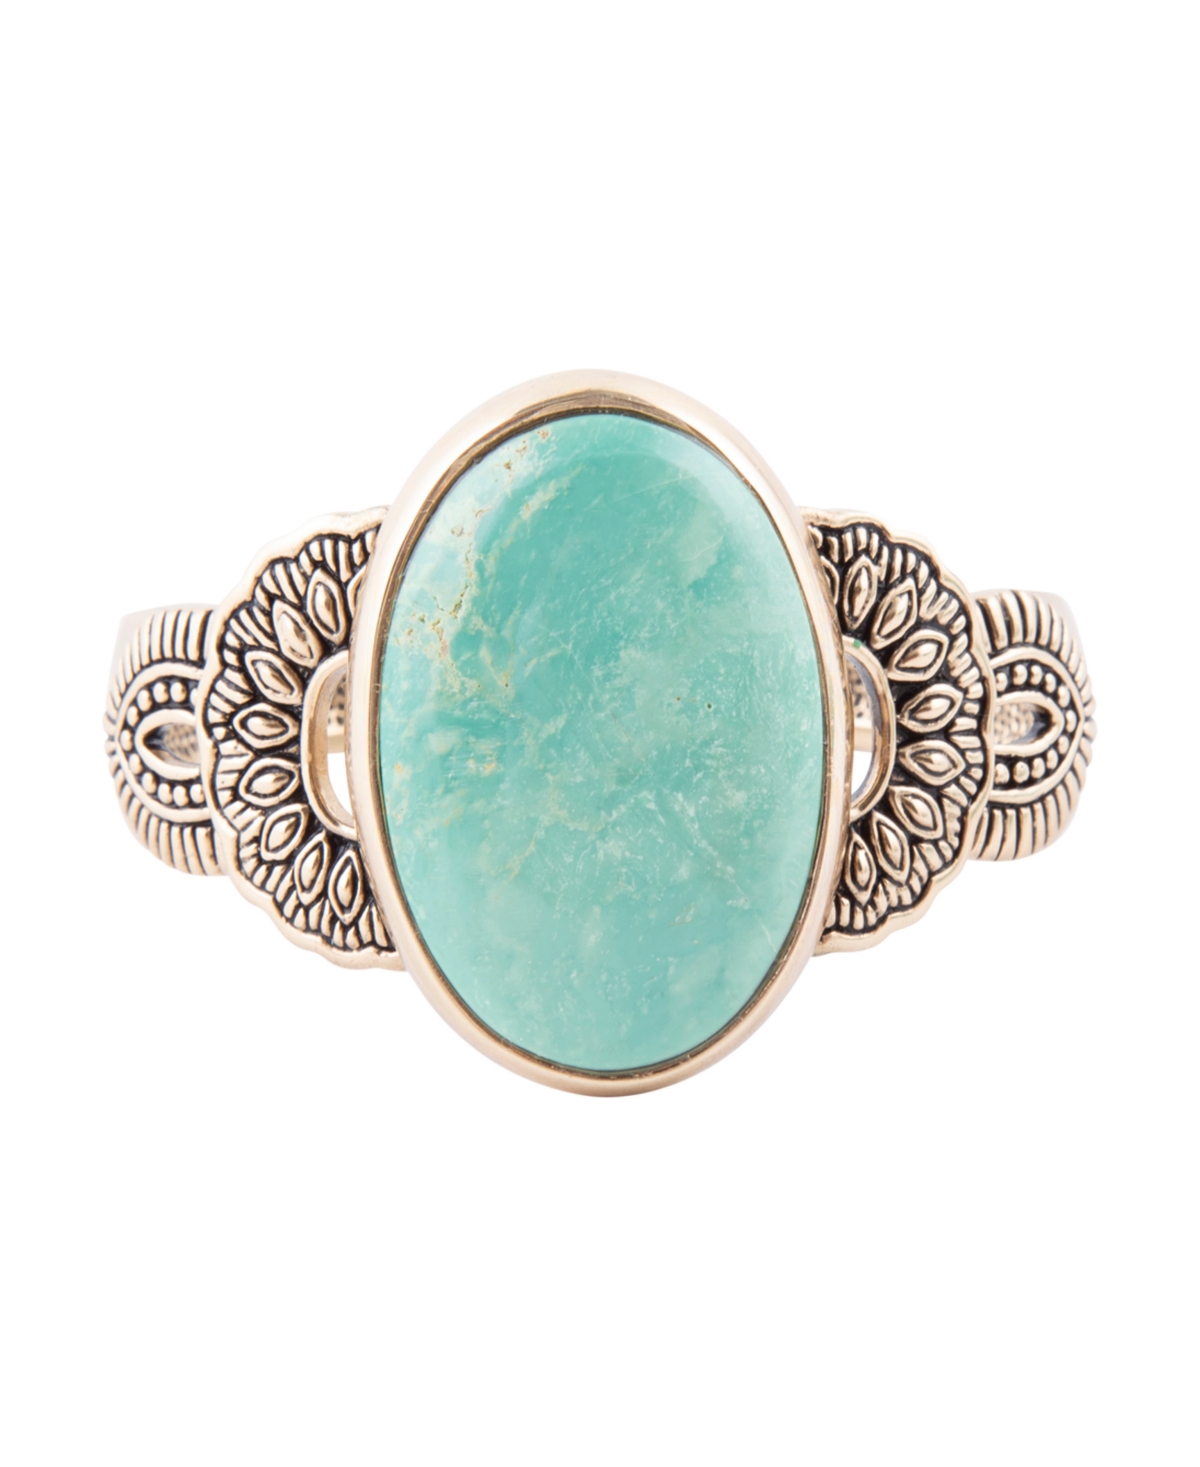 Barse Agave Genuine Blue Turquoise Oval Cuff Bracelet In Genuine Turquoise